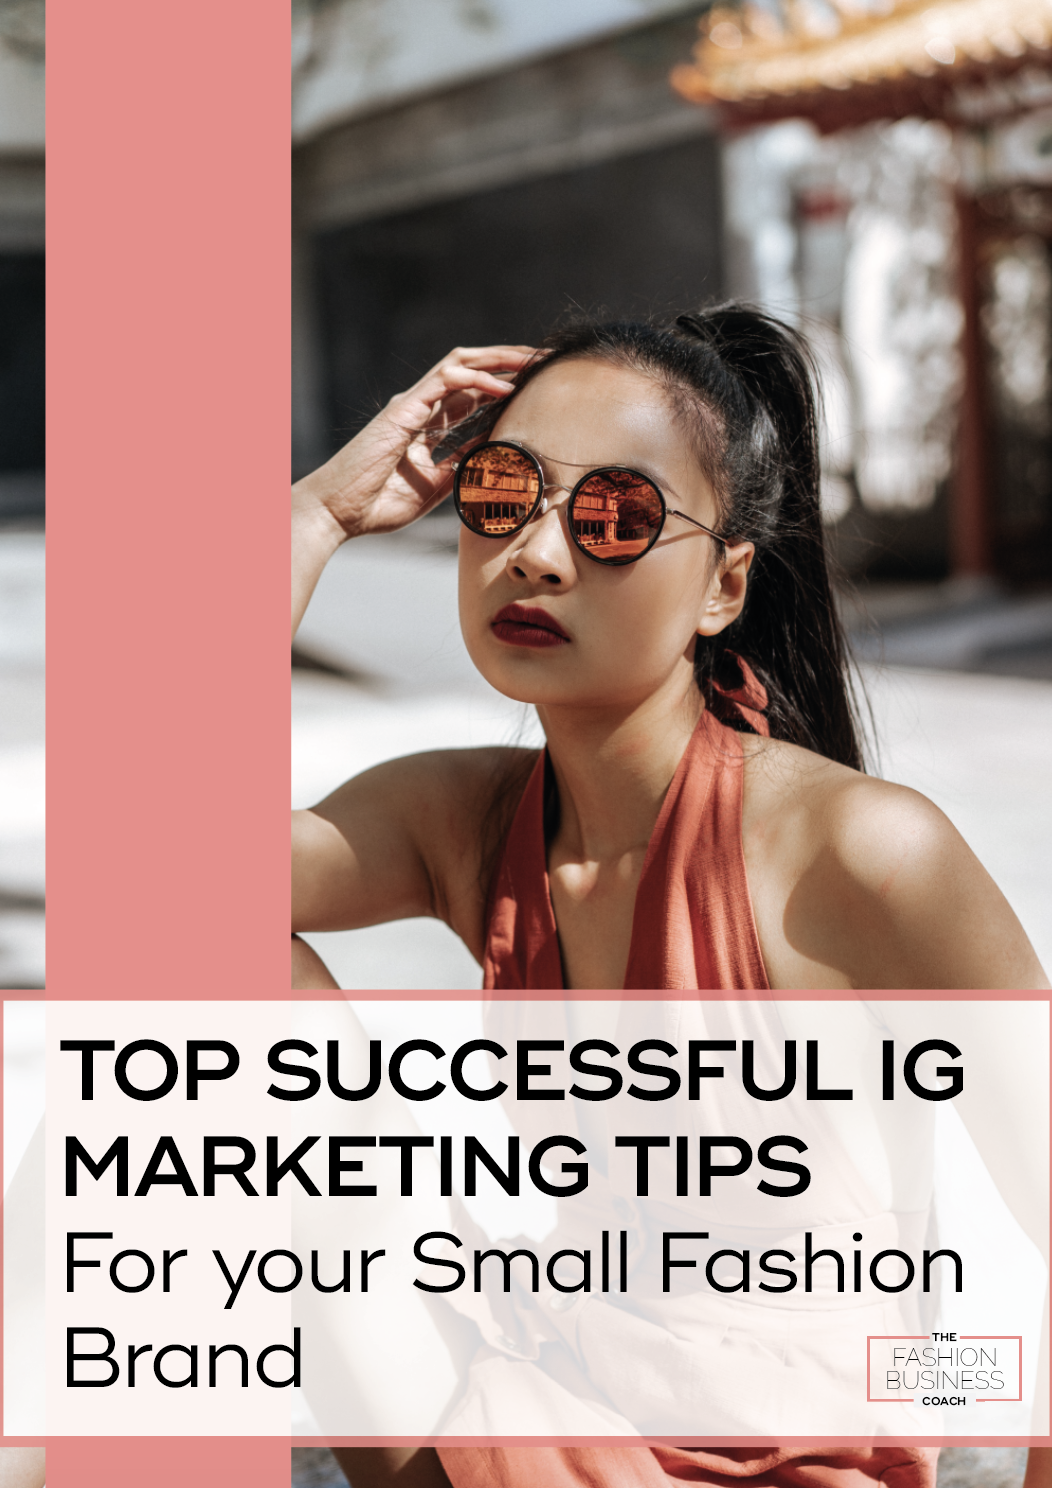 Top Successful IG Marketing Tips for your Small Fashion Brand 1.png